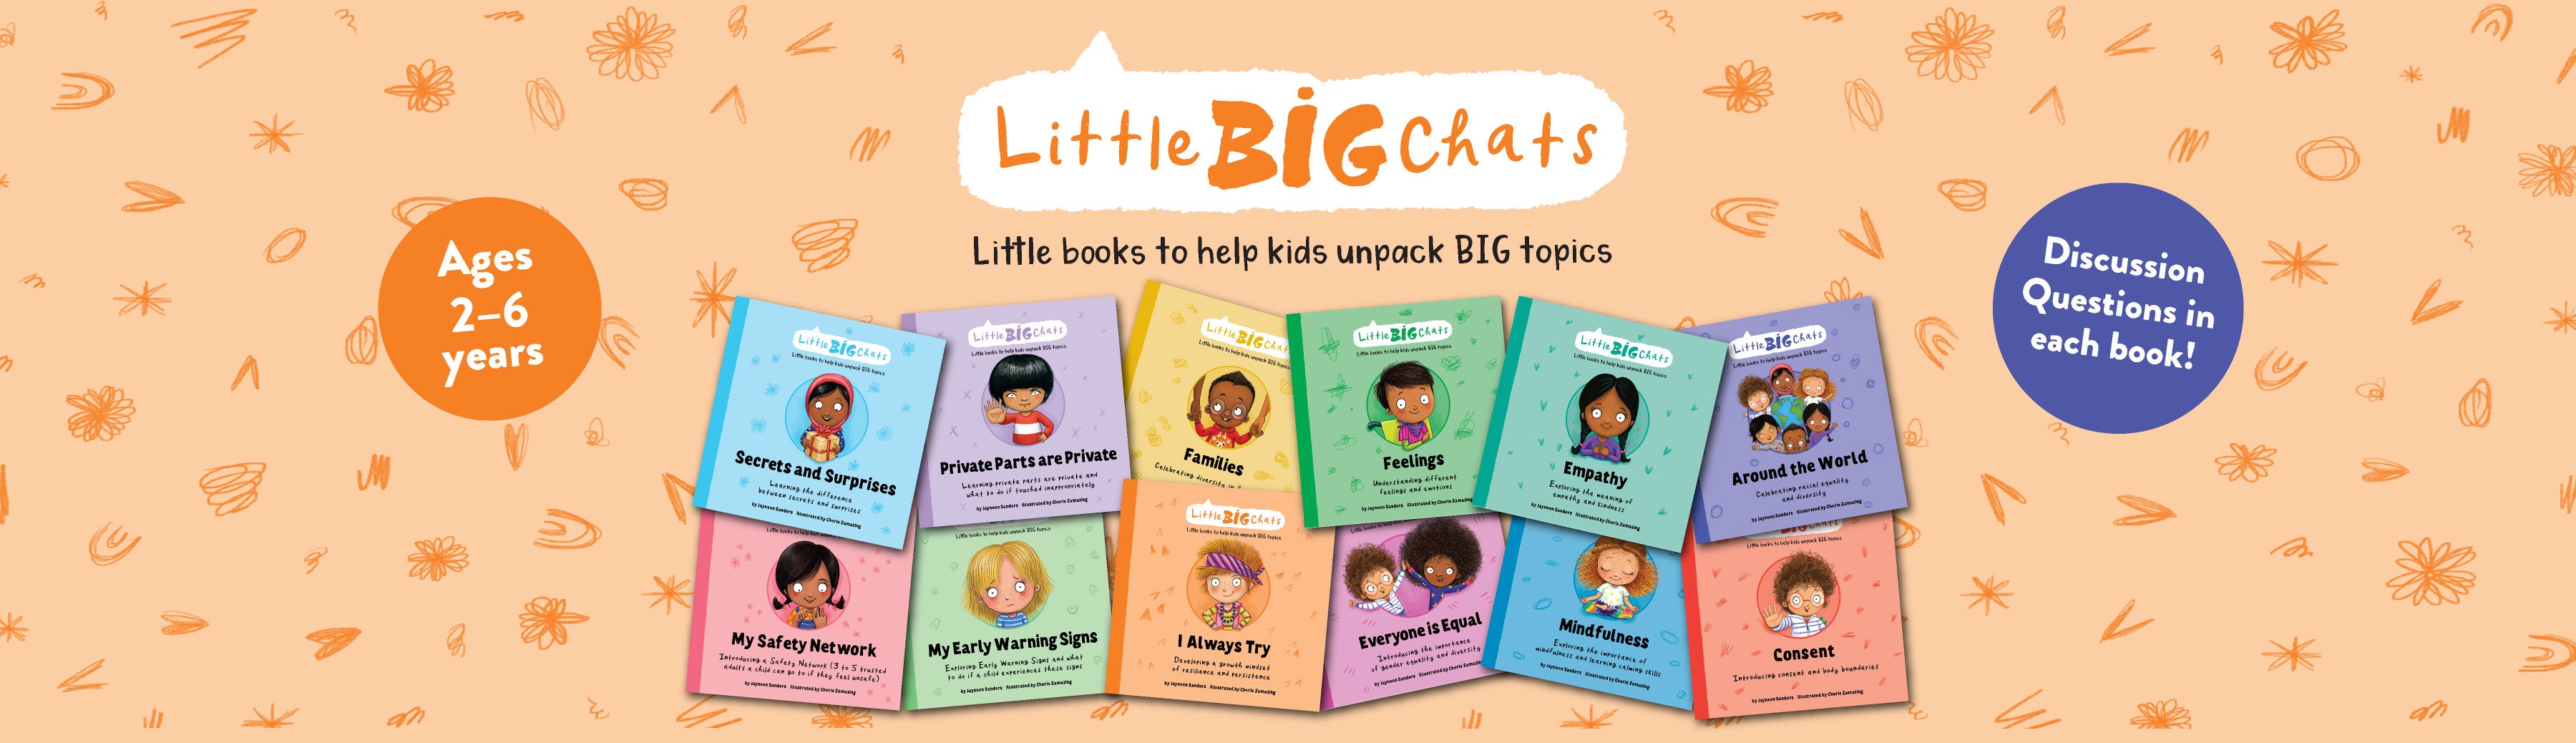 Promotional banner for the 'Little Big Chats' book series. Tagline: 'Little books to help kids unpack big topics'.  Ages 2-6 Years, Discussion Questions in each book.